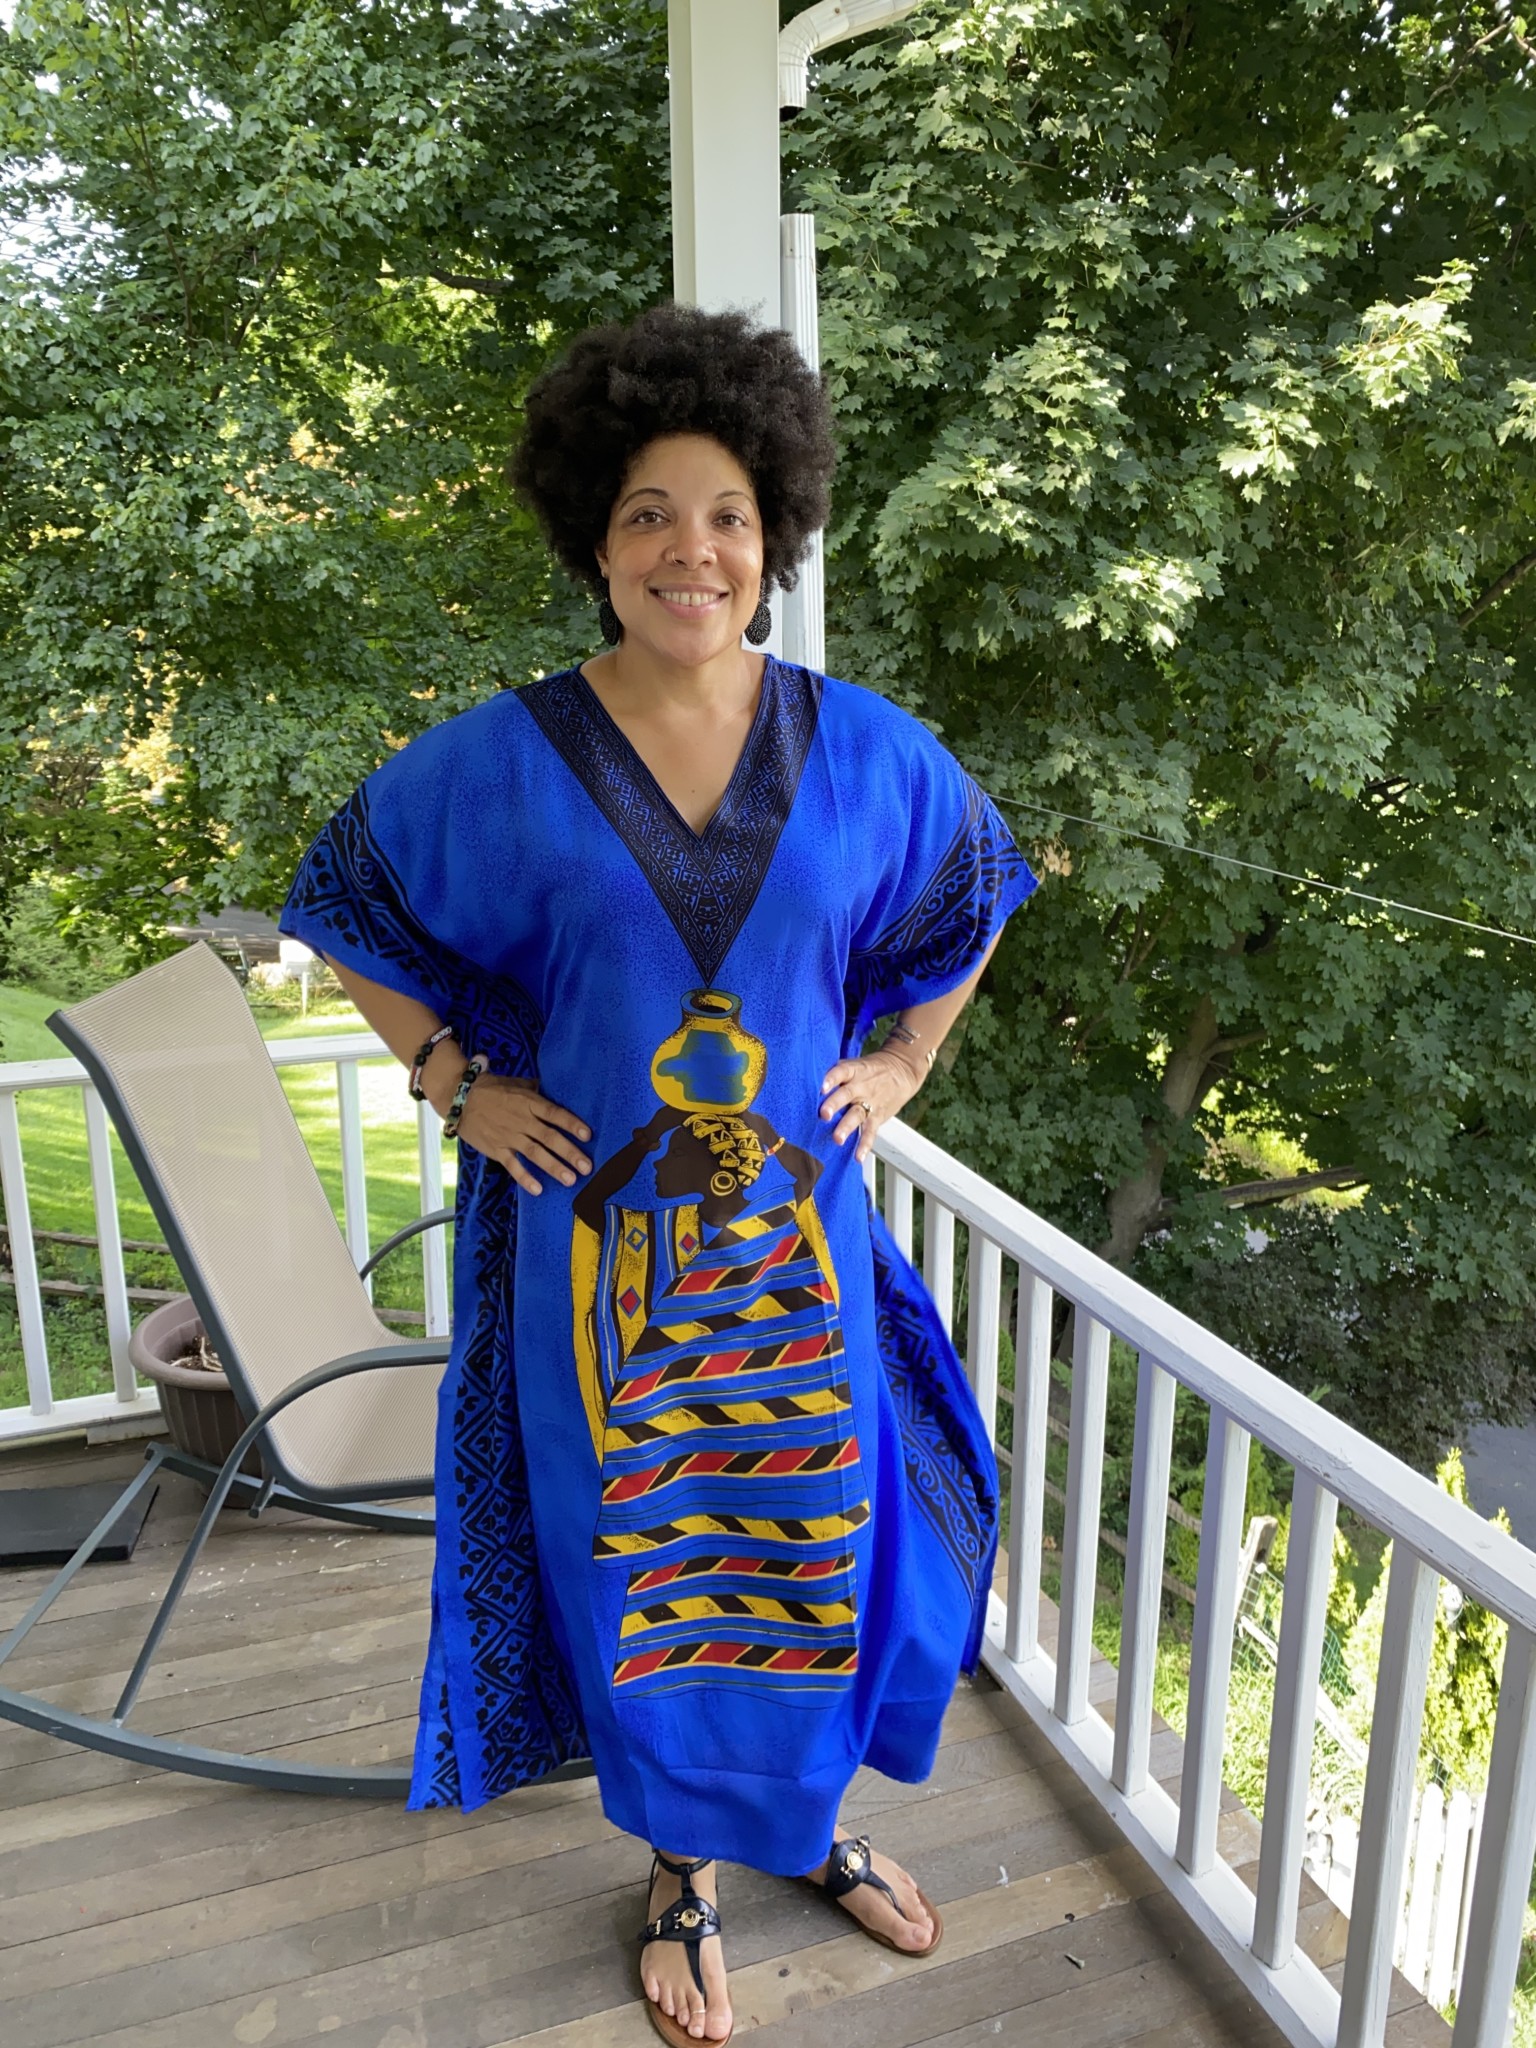 A black woman wearing a blue and Afrocentric patterned caftan.